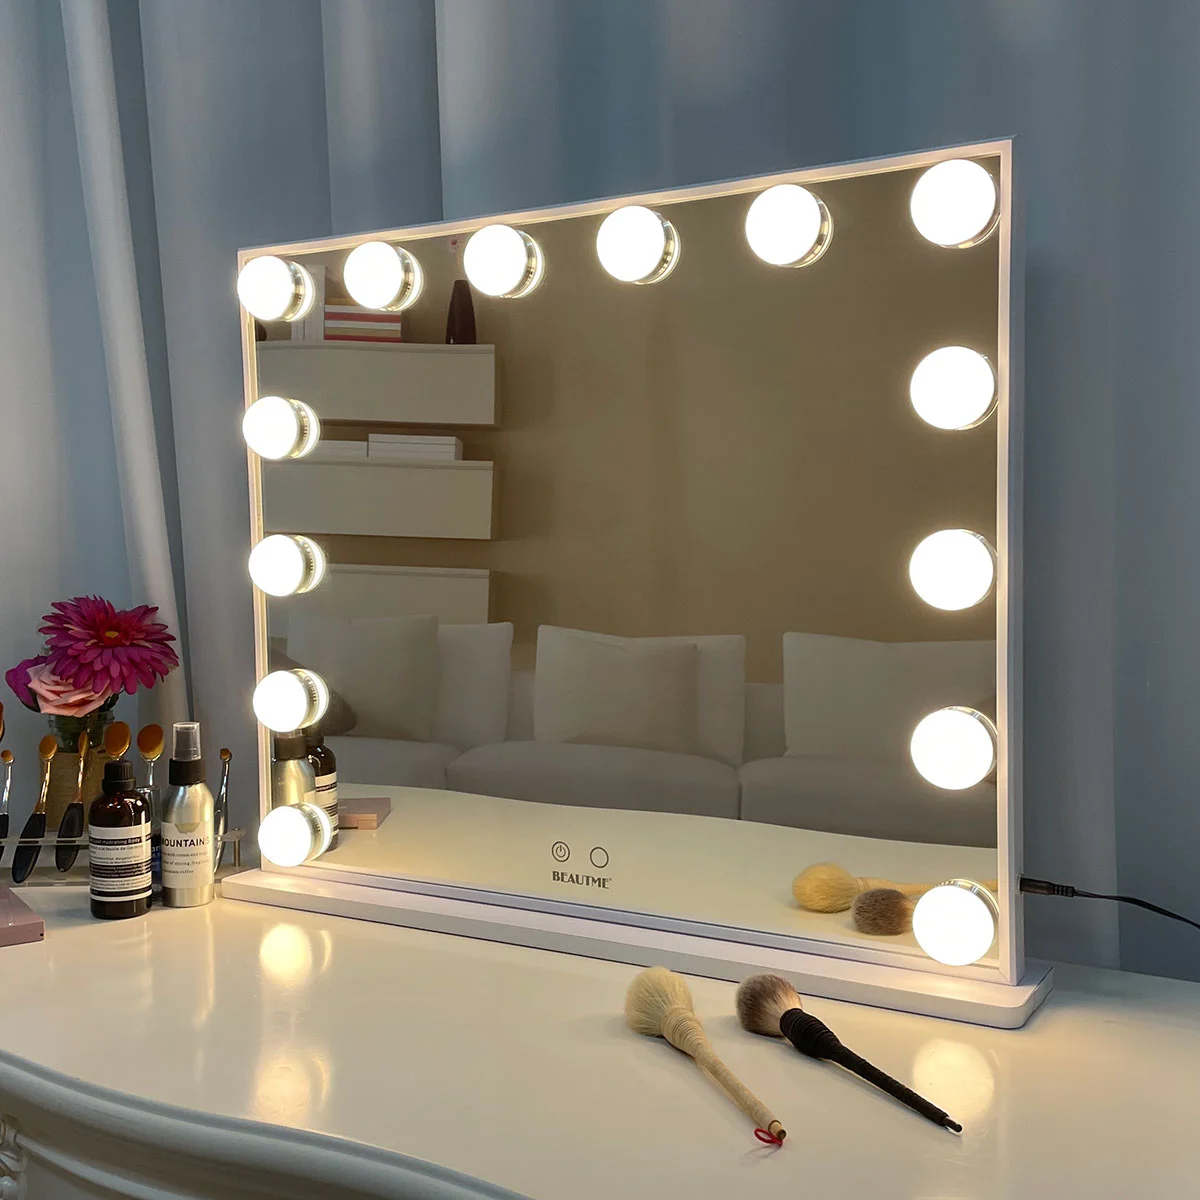 

Hollywood Bedroom Table Make up Mirror Lighted Vanity Mirror With 10X Magnet Magnifying Mirror with 14 Dimmable LED Bulbs, Silver,whit